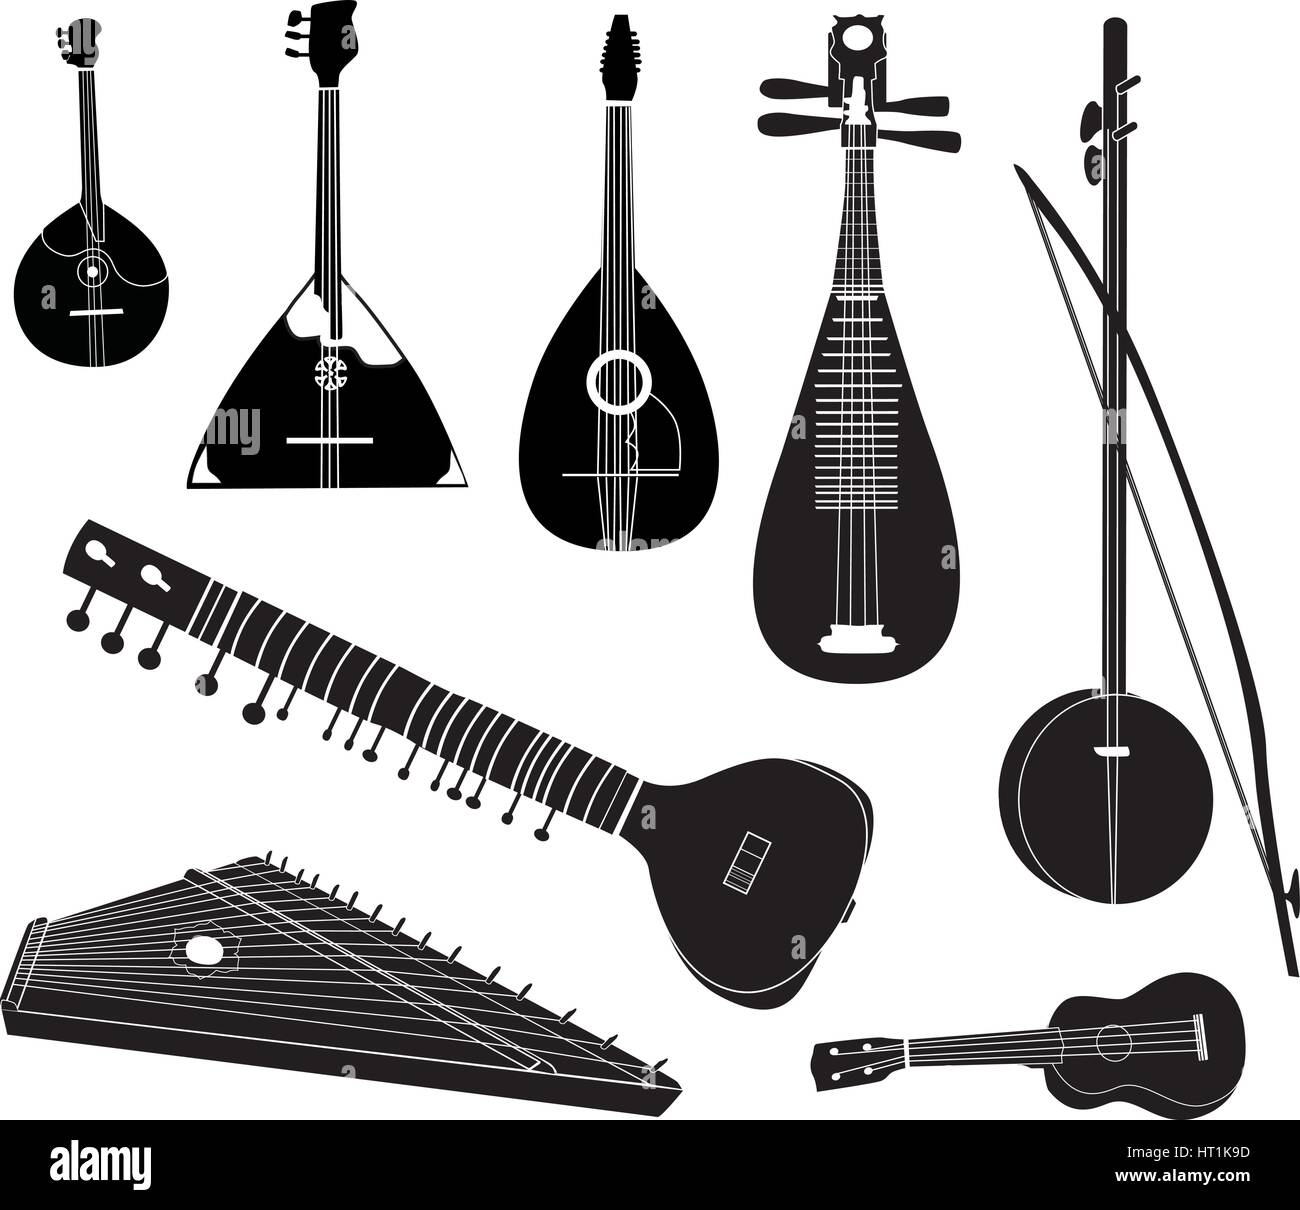 Ethnic music instruments vector set. Musical instrument silhouette on white background. Stock Vector